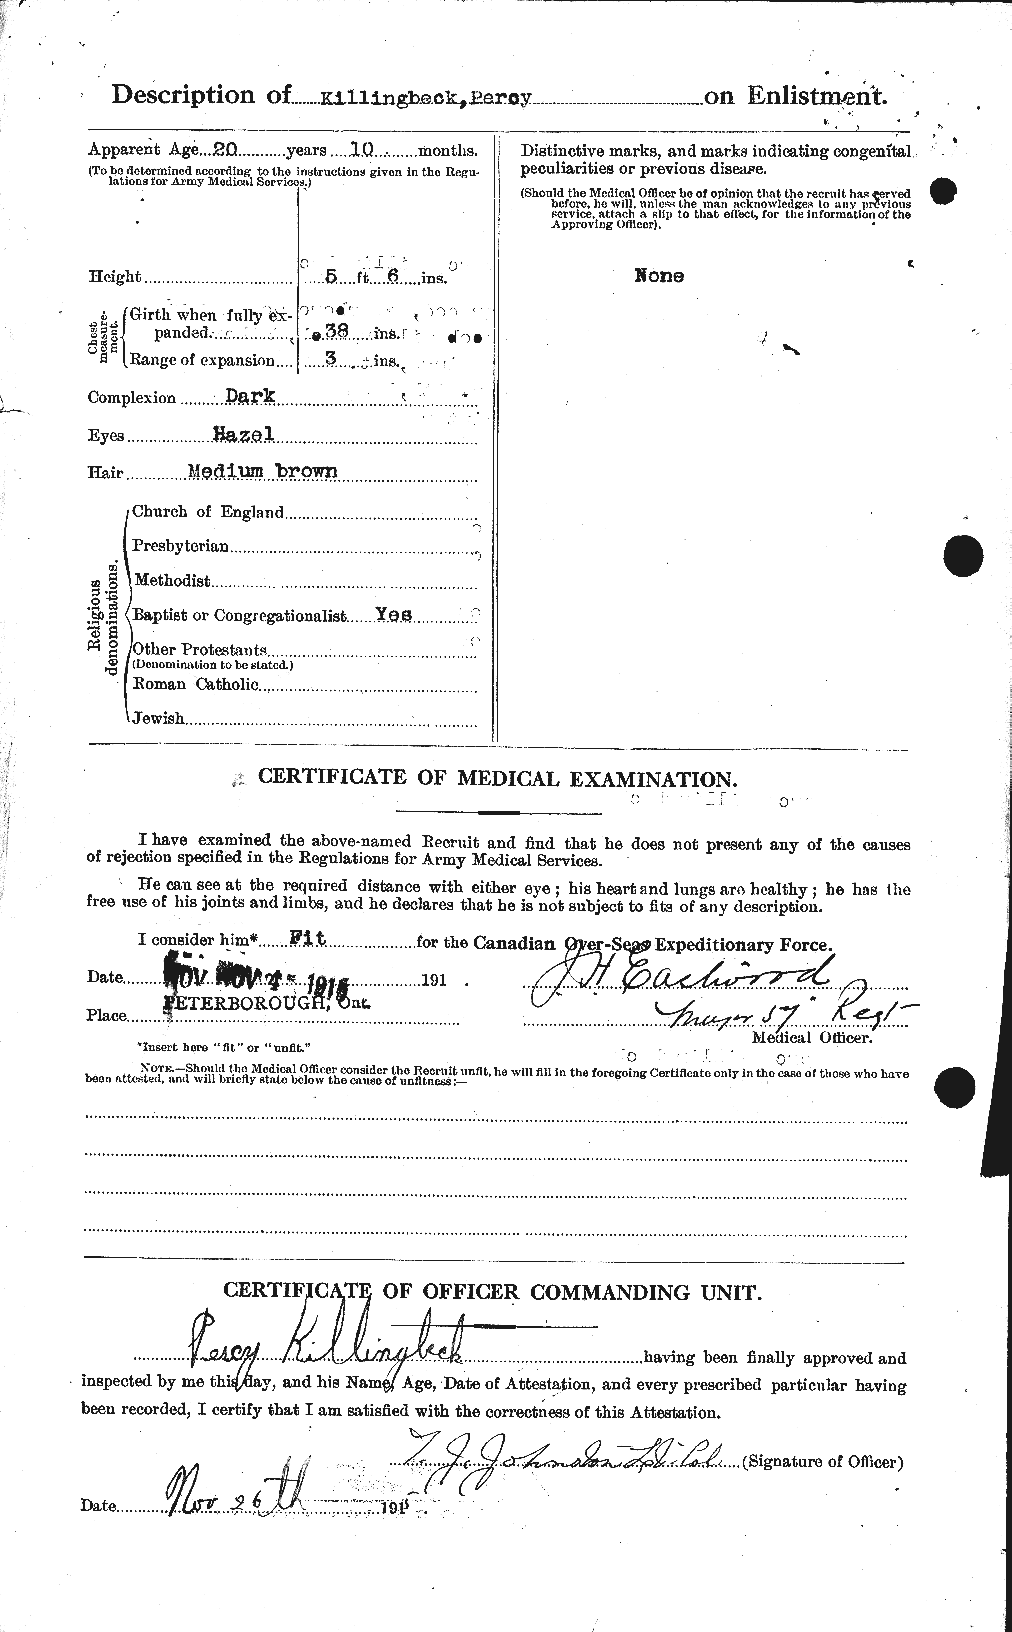 Personnel Records of the First World War - CEF 434079b